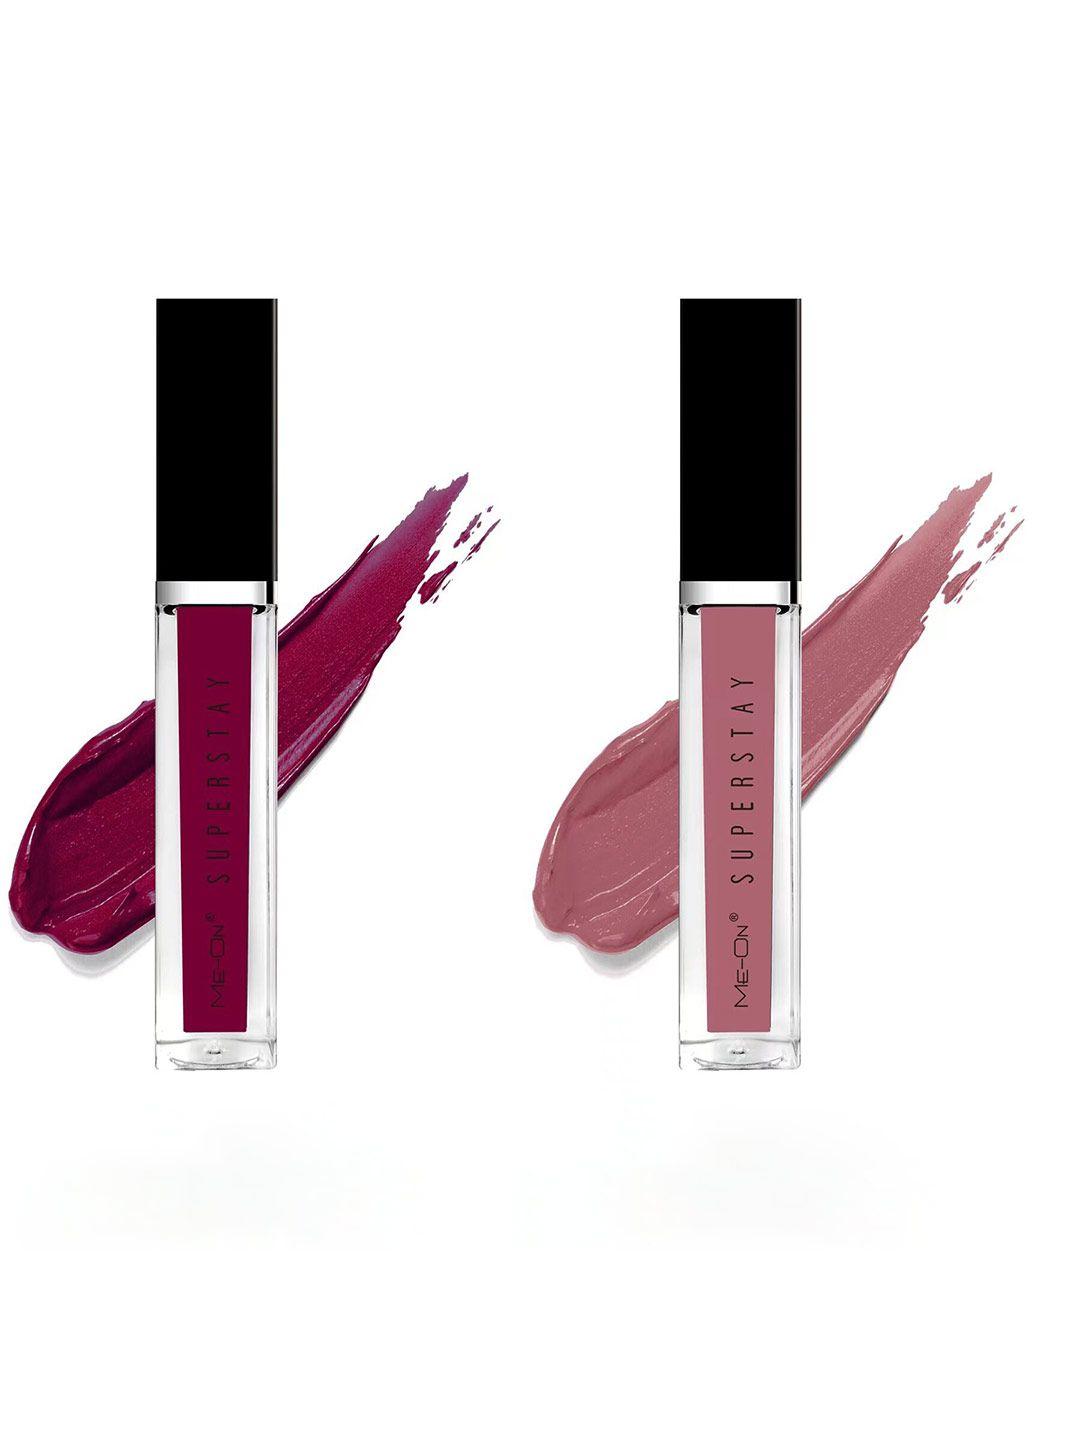 me-on superstay set of 2 glossy lip gloss 12 ml each - red wine 12 and kinda sexy 22